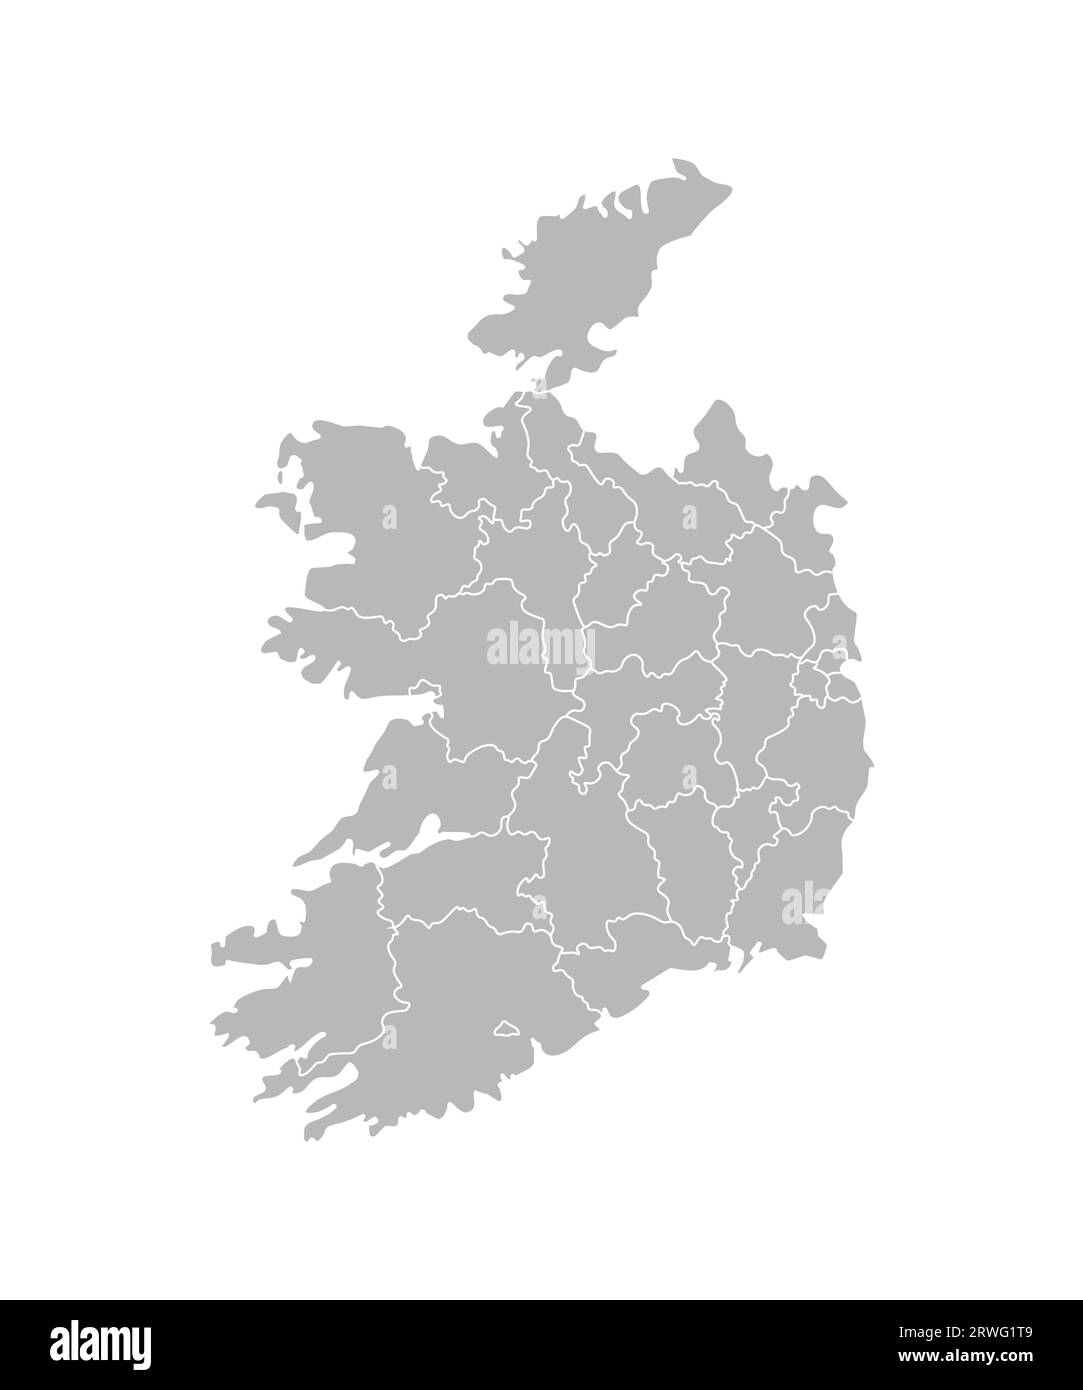 Vector isolated illustration of simplified administrative map of Republic of Ireland. Borders of the provinces (regions). Grey silhouettes. White outl Stock Vector